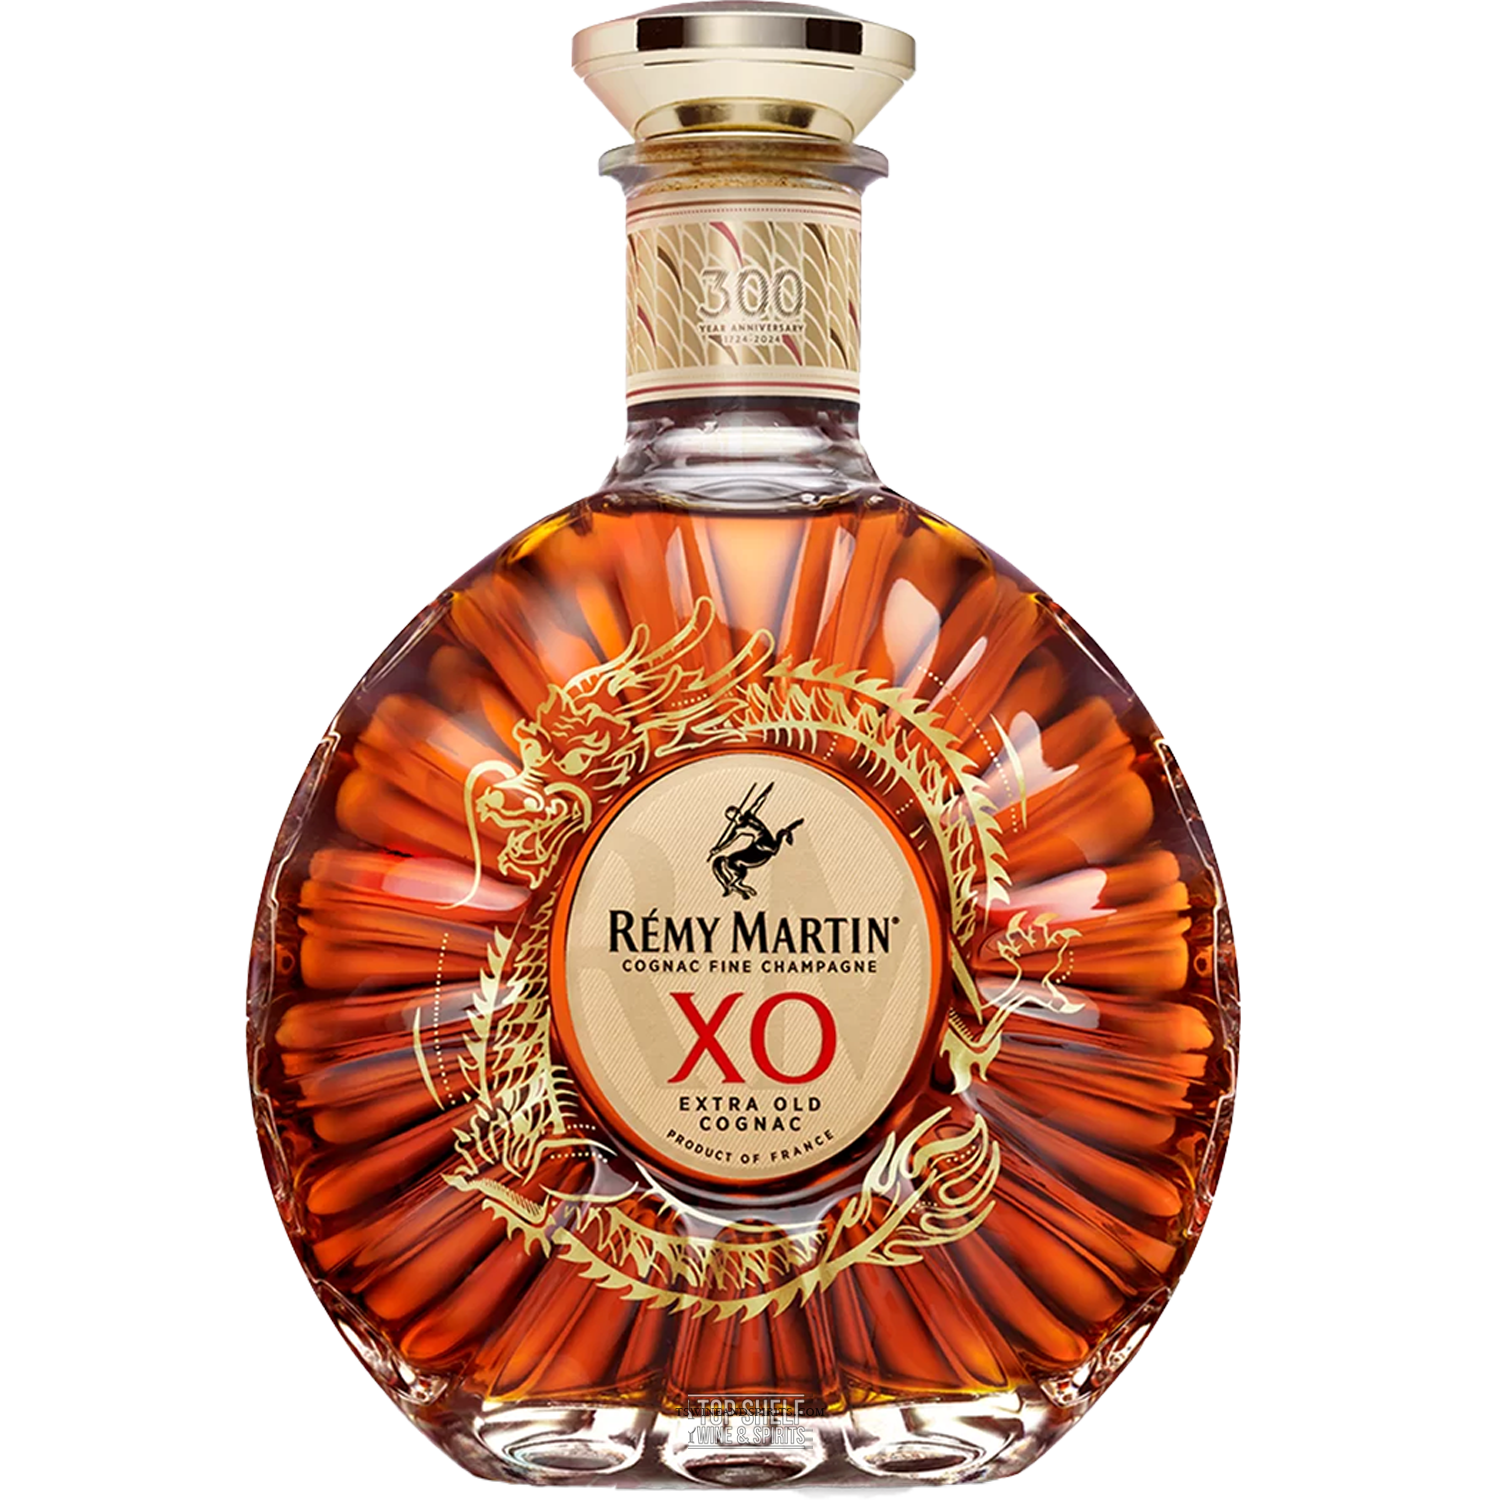 Remy Martin XO Excellence Lunar New Year Cognac (Limited Edition)